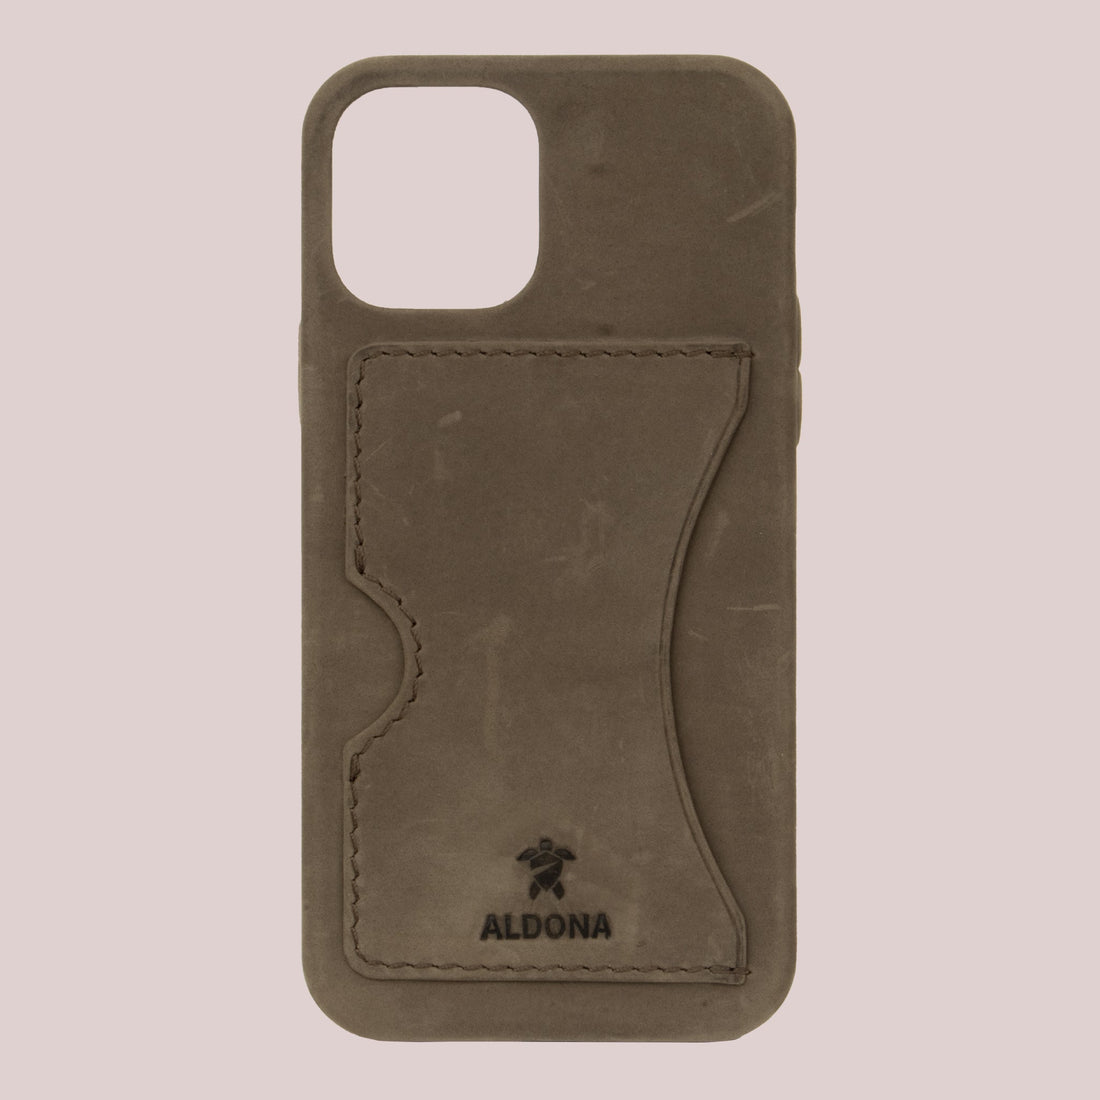 Baxter Card Case for iPhone 14 Pro Max - Vintage Tan